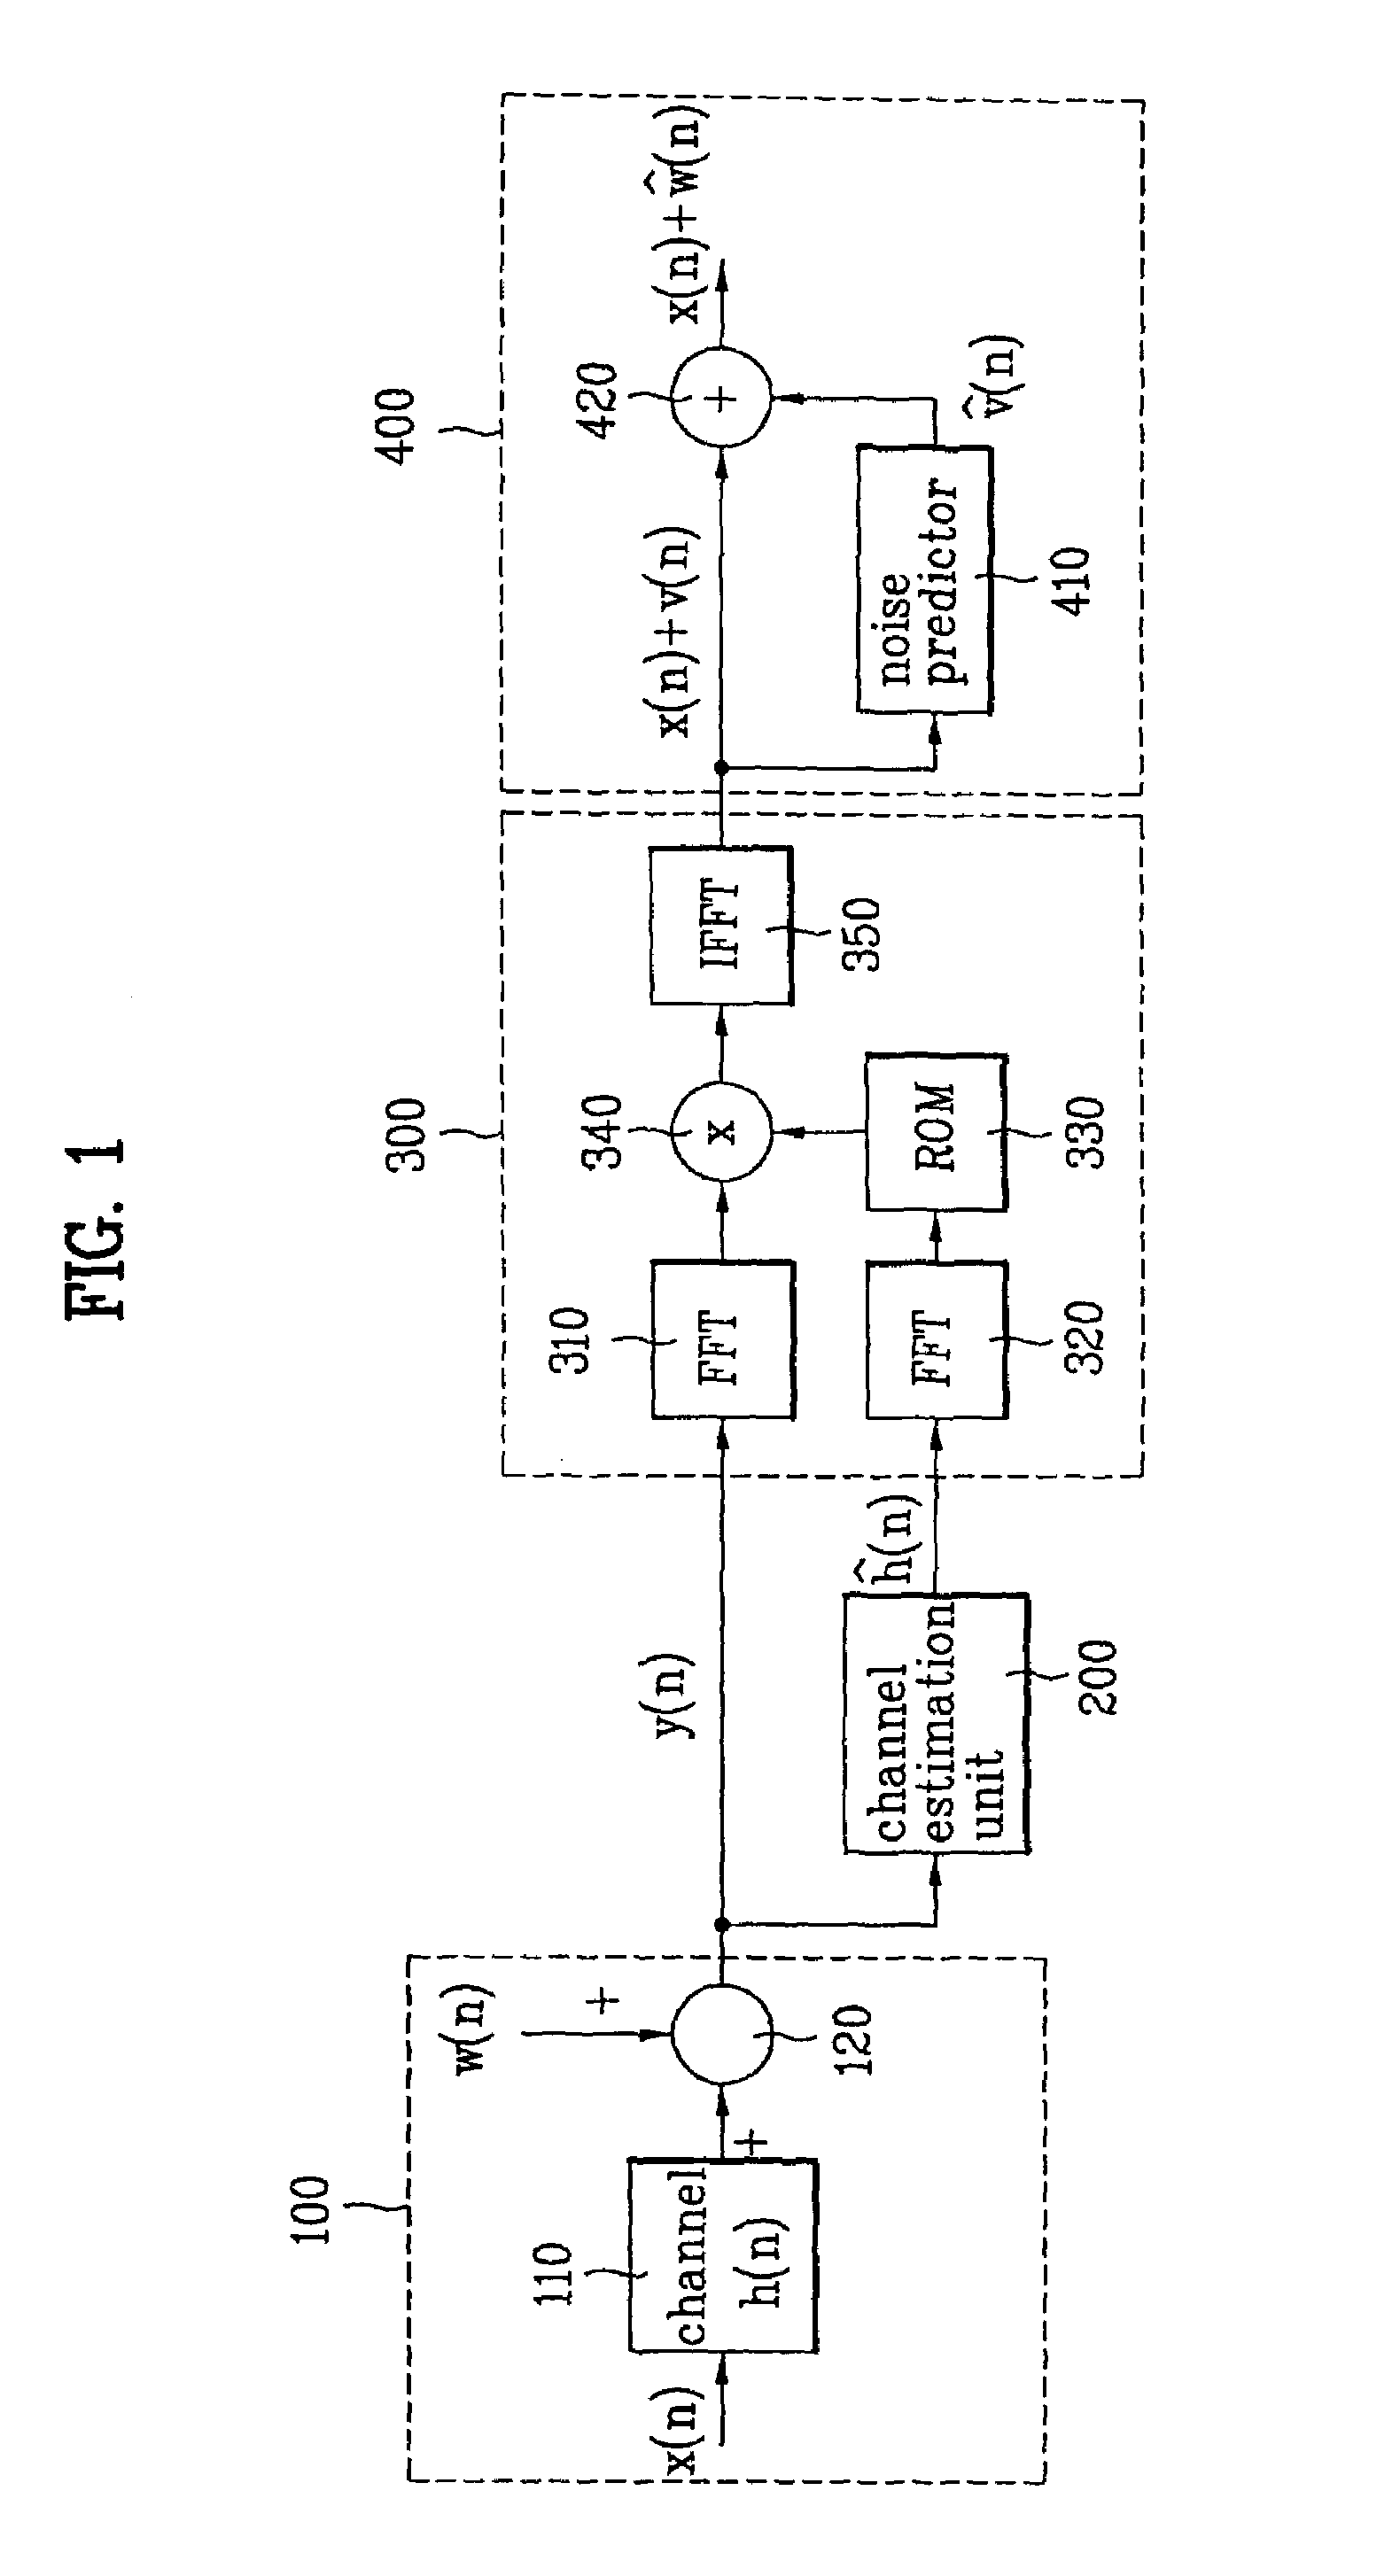 Channel equalizer and digital TV receiver using the same